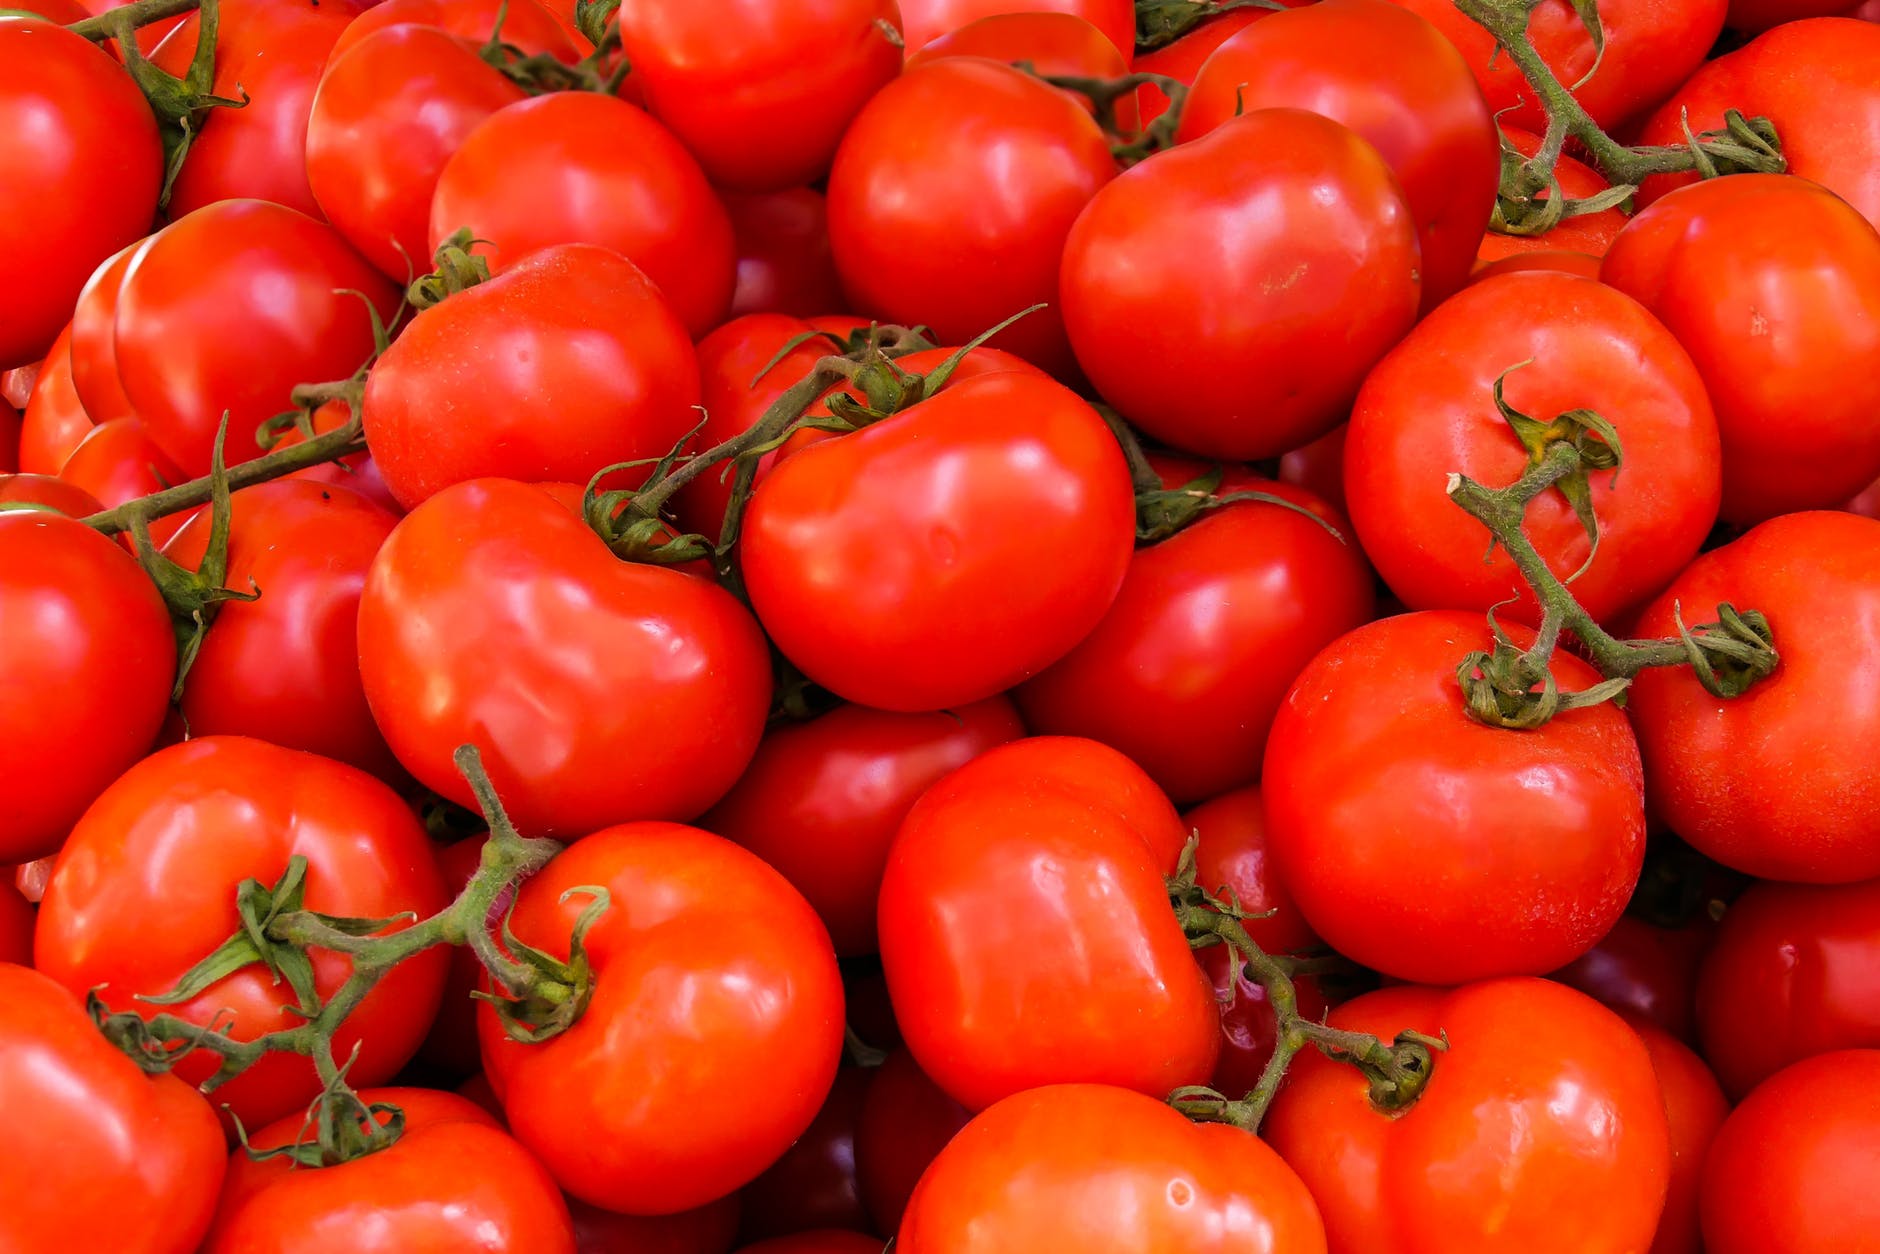 Guide to Different Kinds of Tomatoes